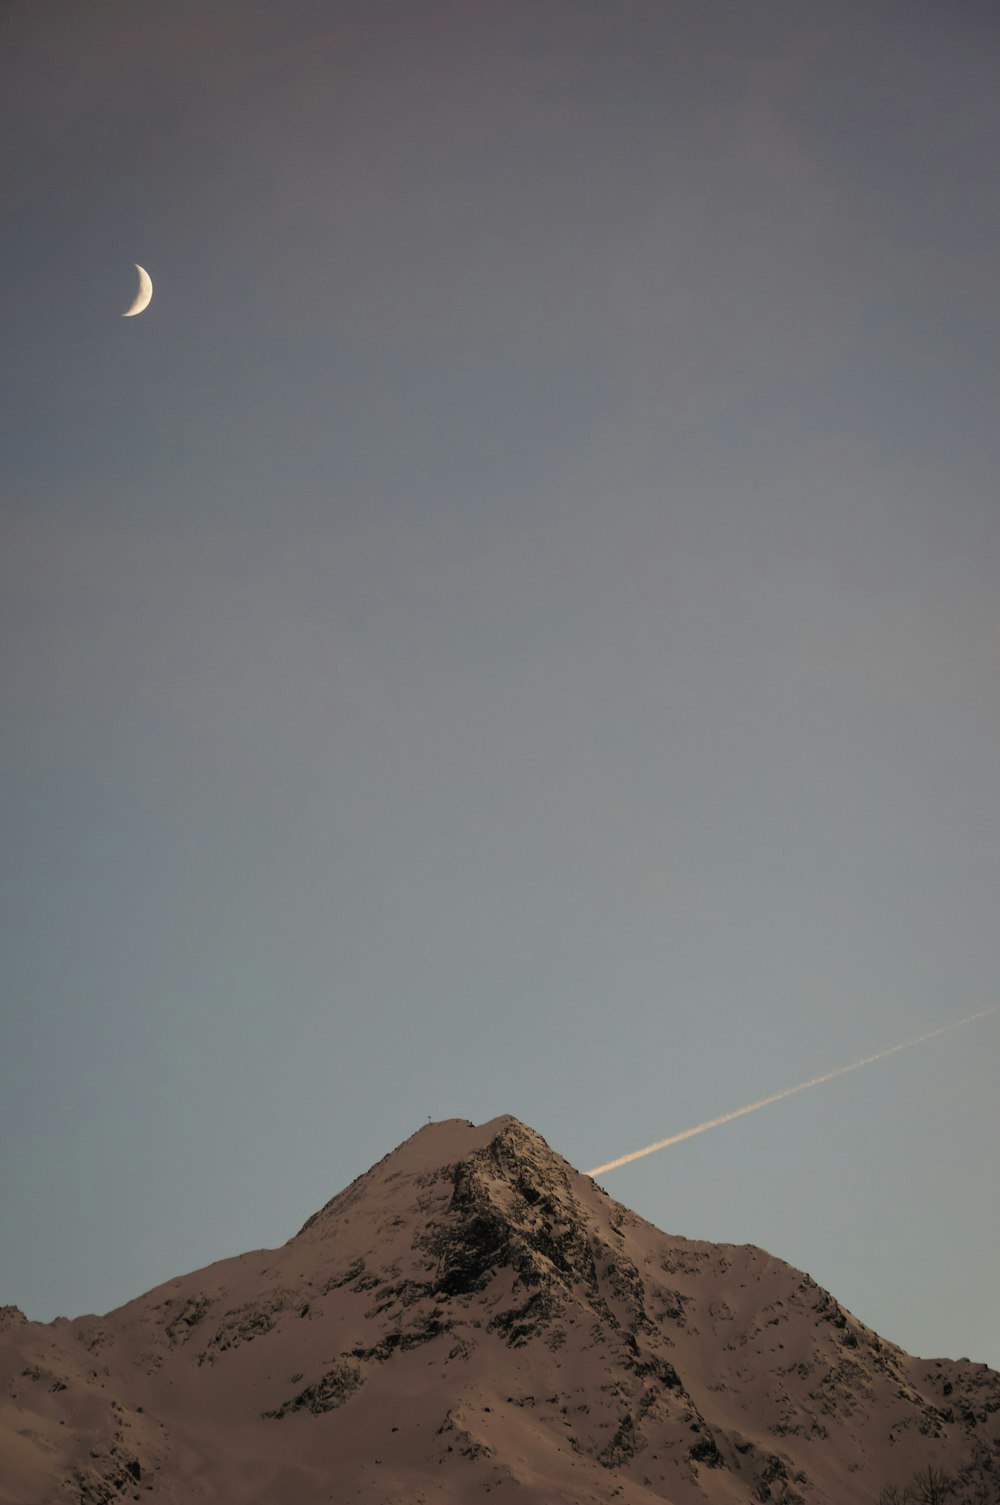 a plane flying over a mountain with a moon in the sky